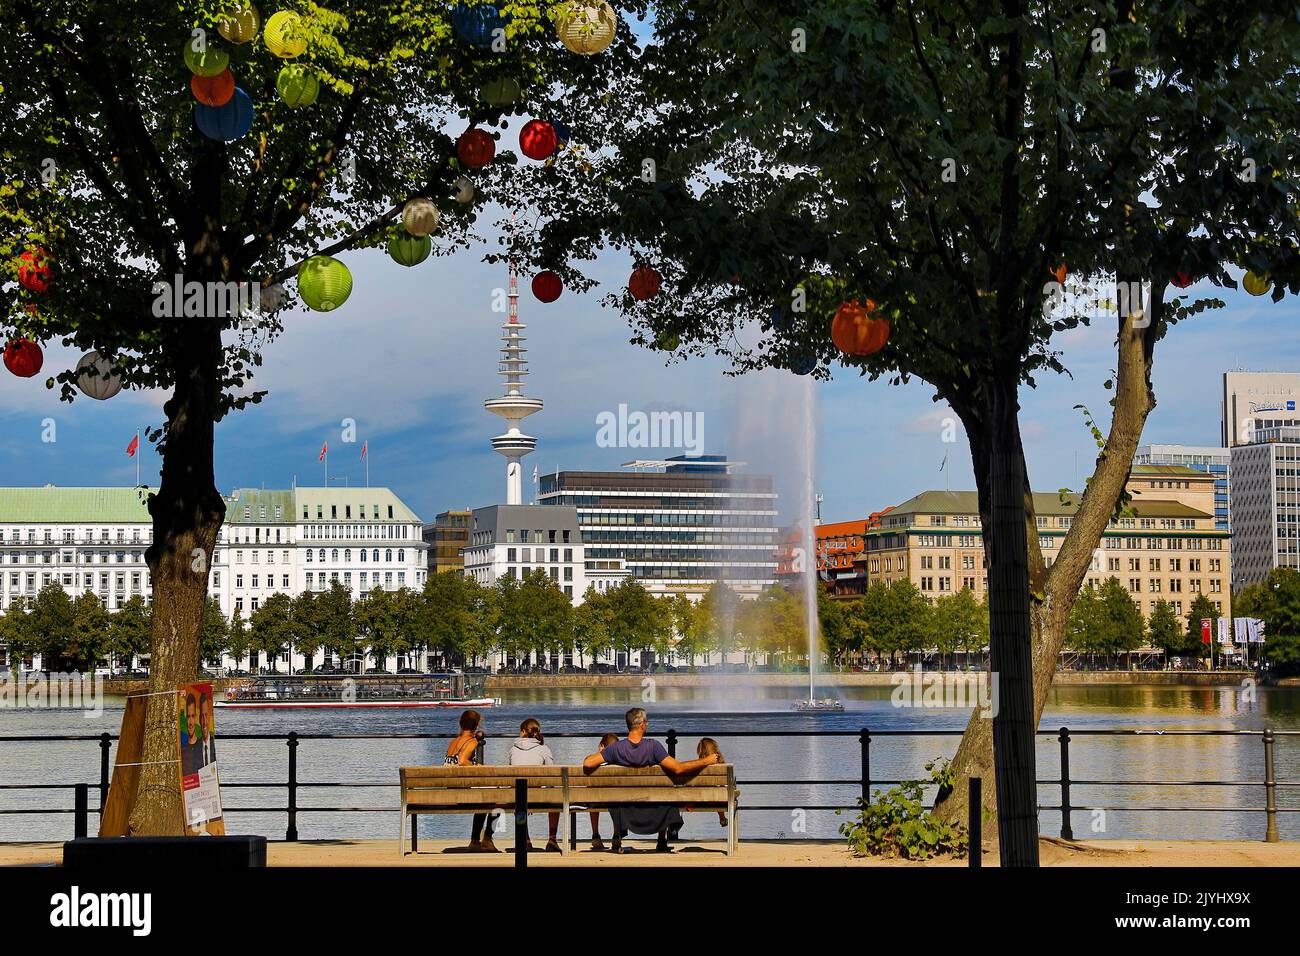 Trees at the Ballindamm at the Inner Alster are decorated with lampions during the event 'Hamburg Summer Gardens', Germany, Hamburg Stock Photo